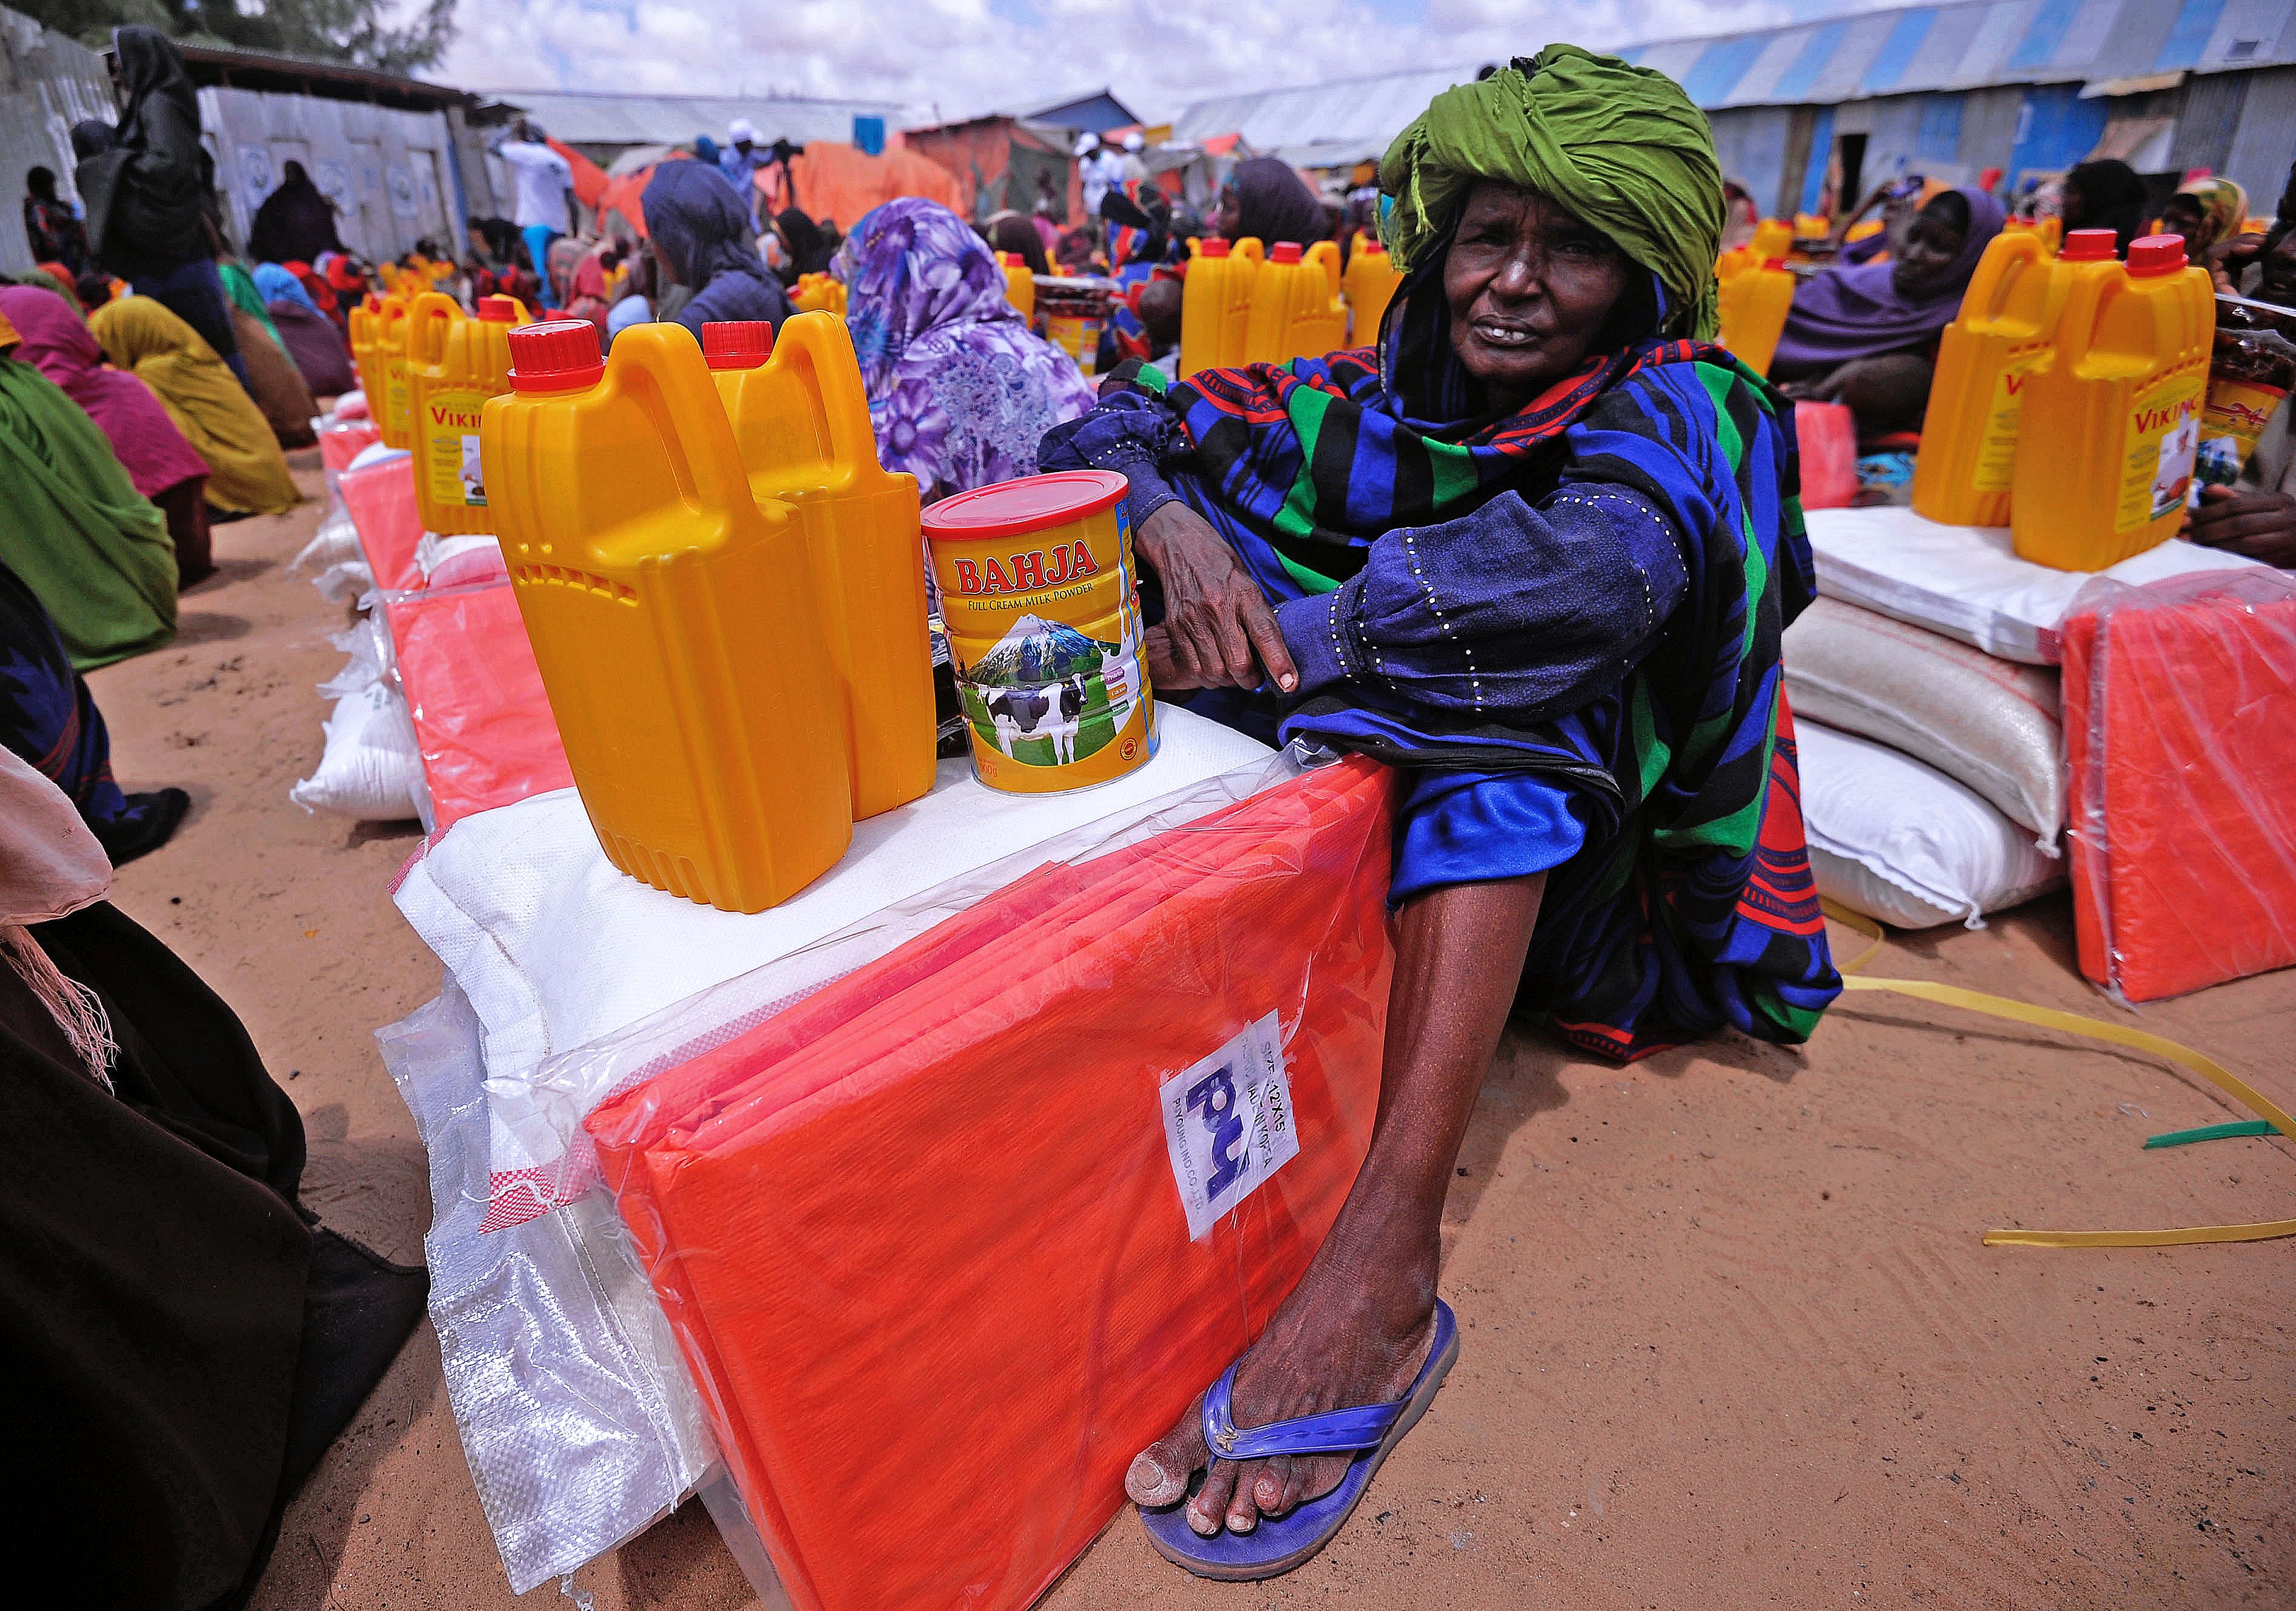 A Somali woman displaced by drought waits for food and water at an aid distribution centre outside Mogadishu on April 6, 2017. (Mohamed Abdiwahab—AFP/Getty Images)